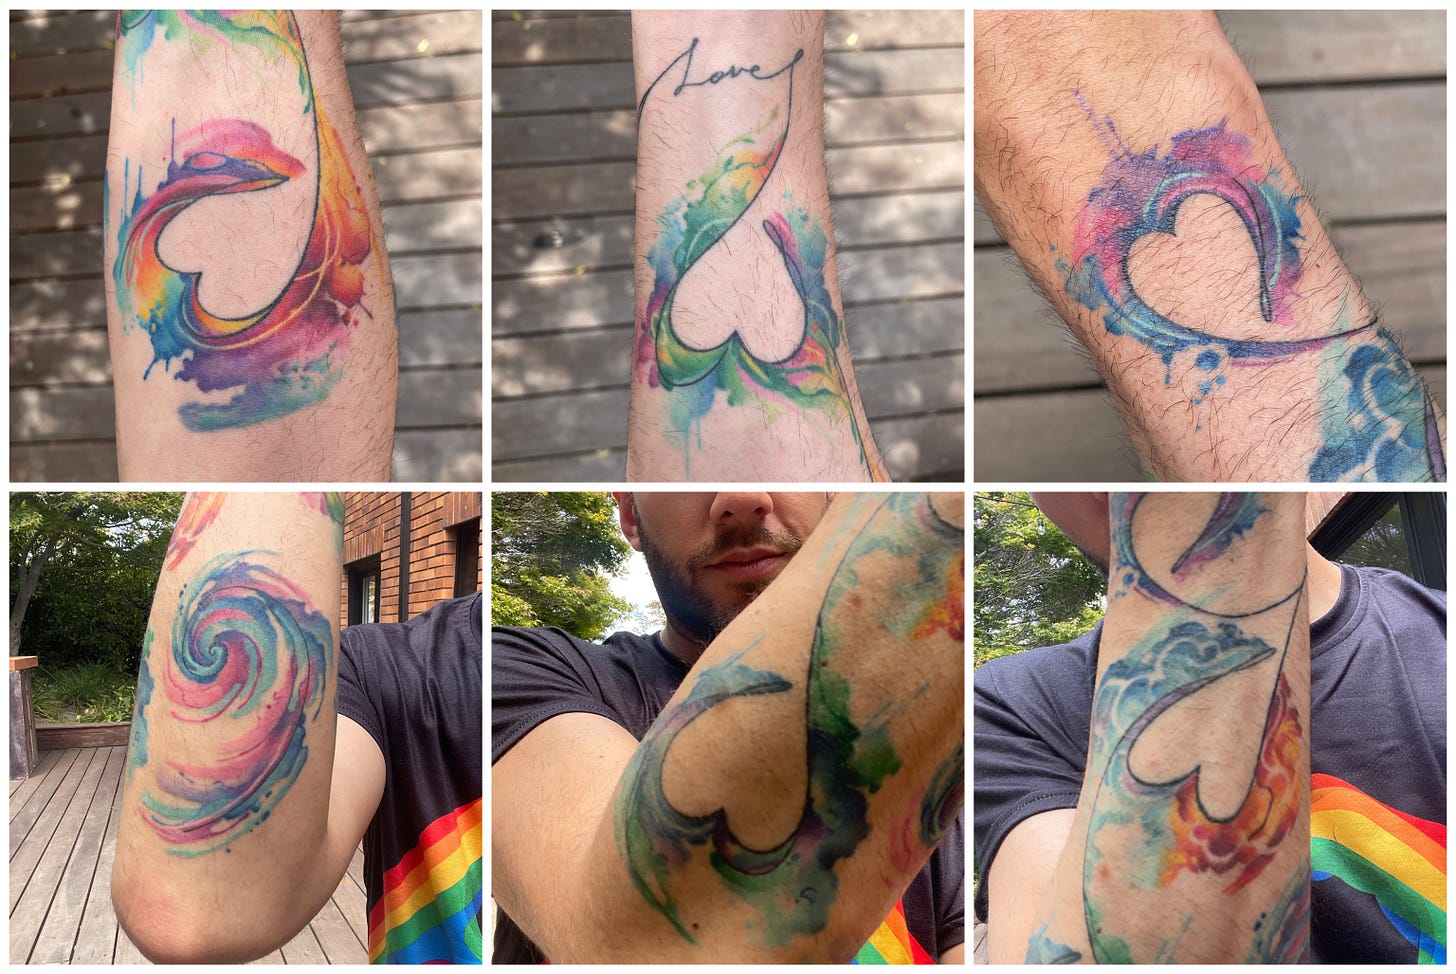 The six pieces of my tattoo, shown in order: Fire, Earth, Love, Universal Growth, Water, and Air